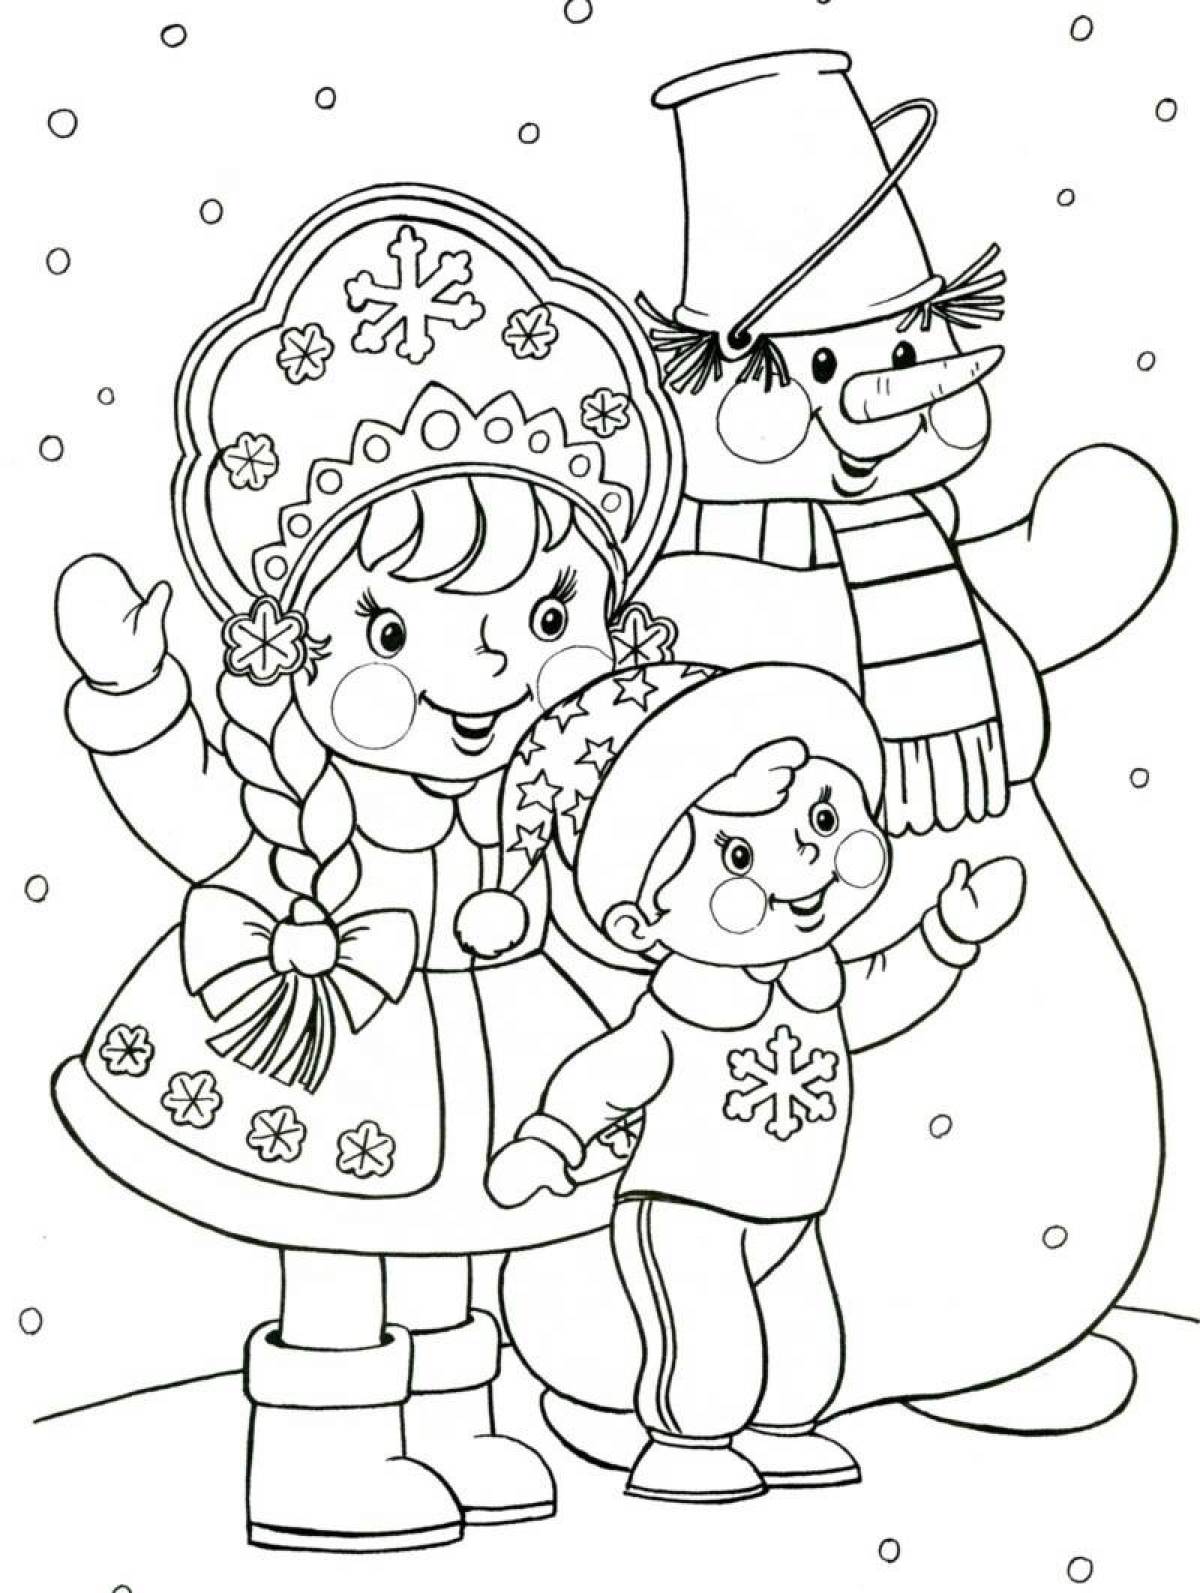 Live coloring Christmas pictures for kids